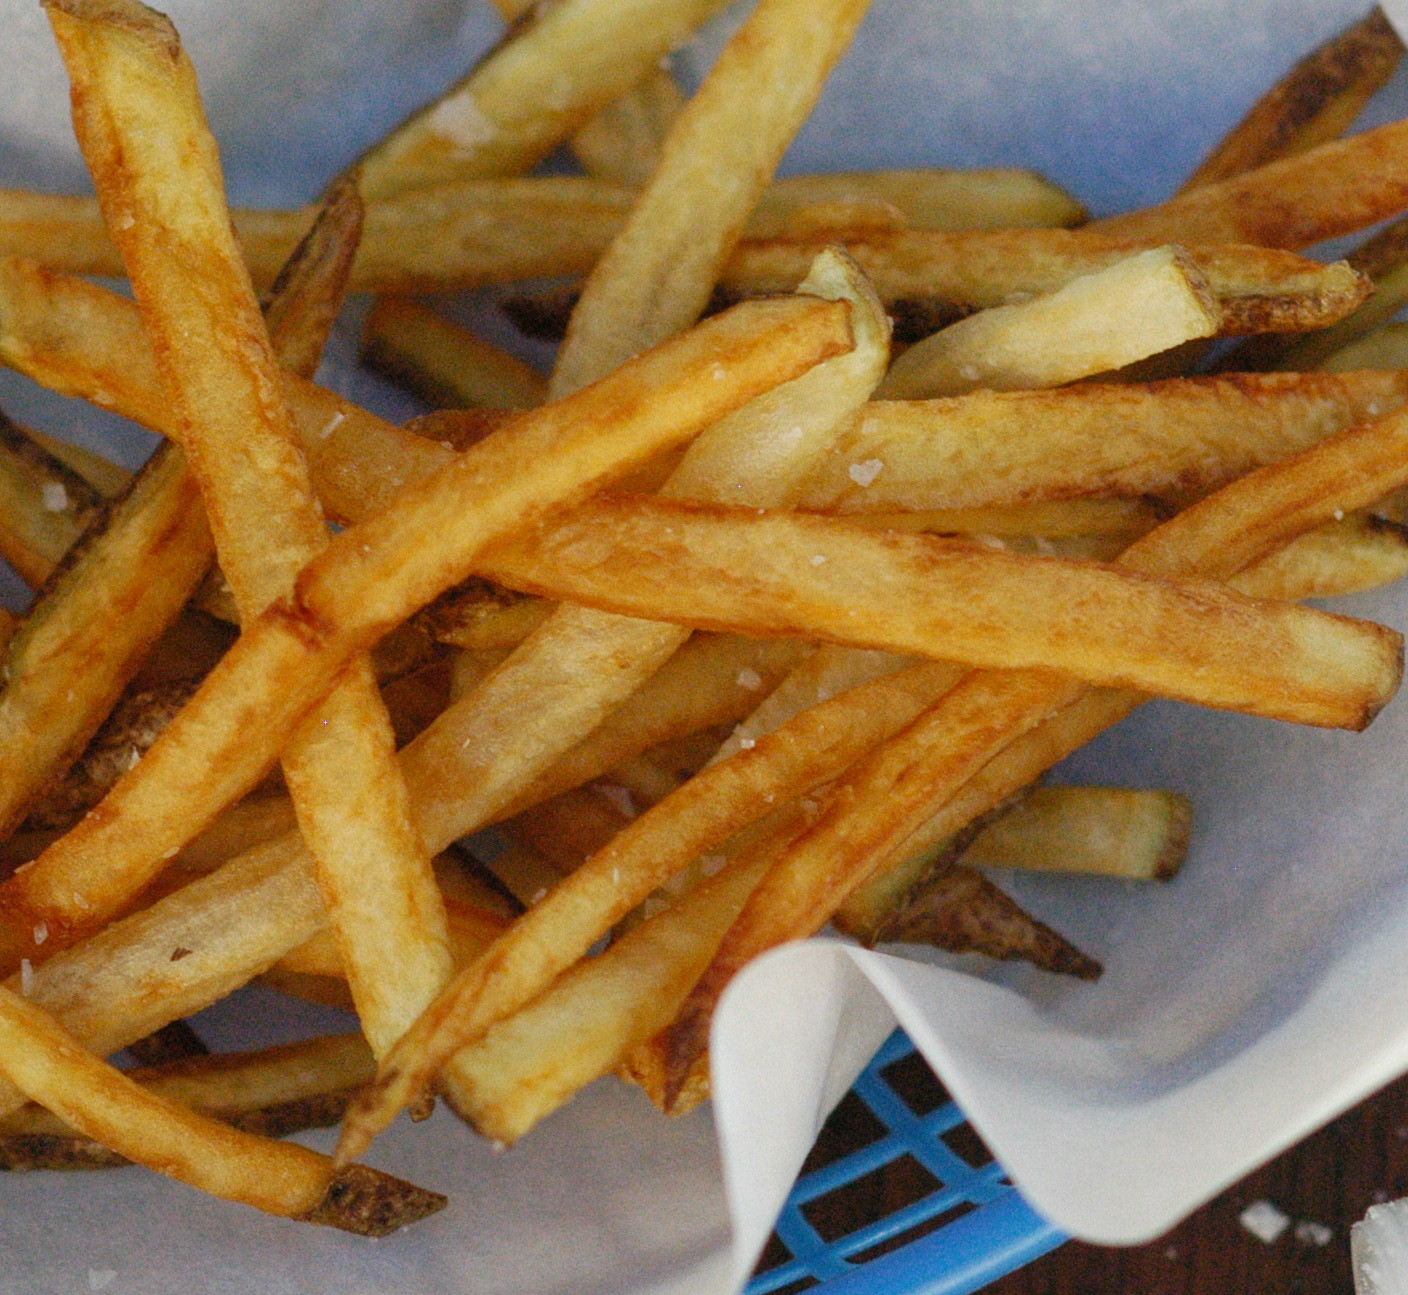 What’s in McDonald’s French Fries?